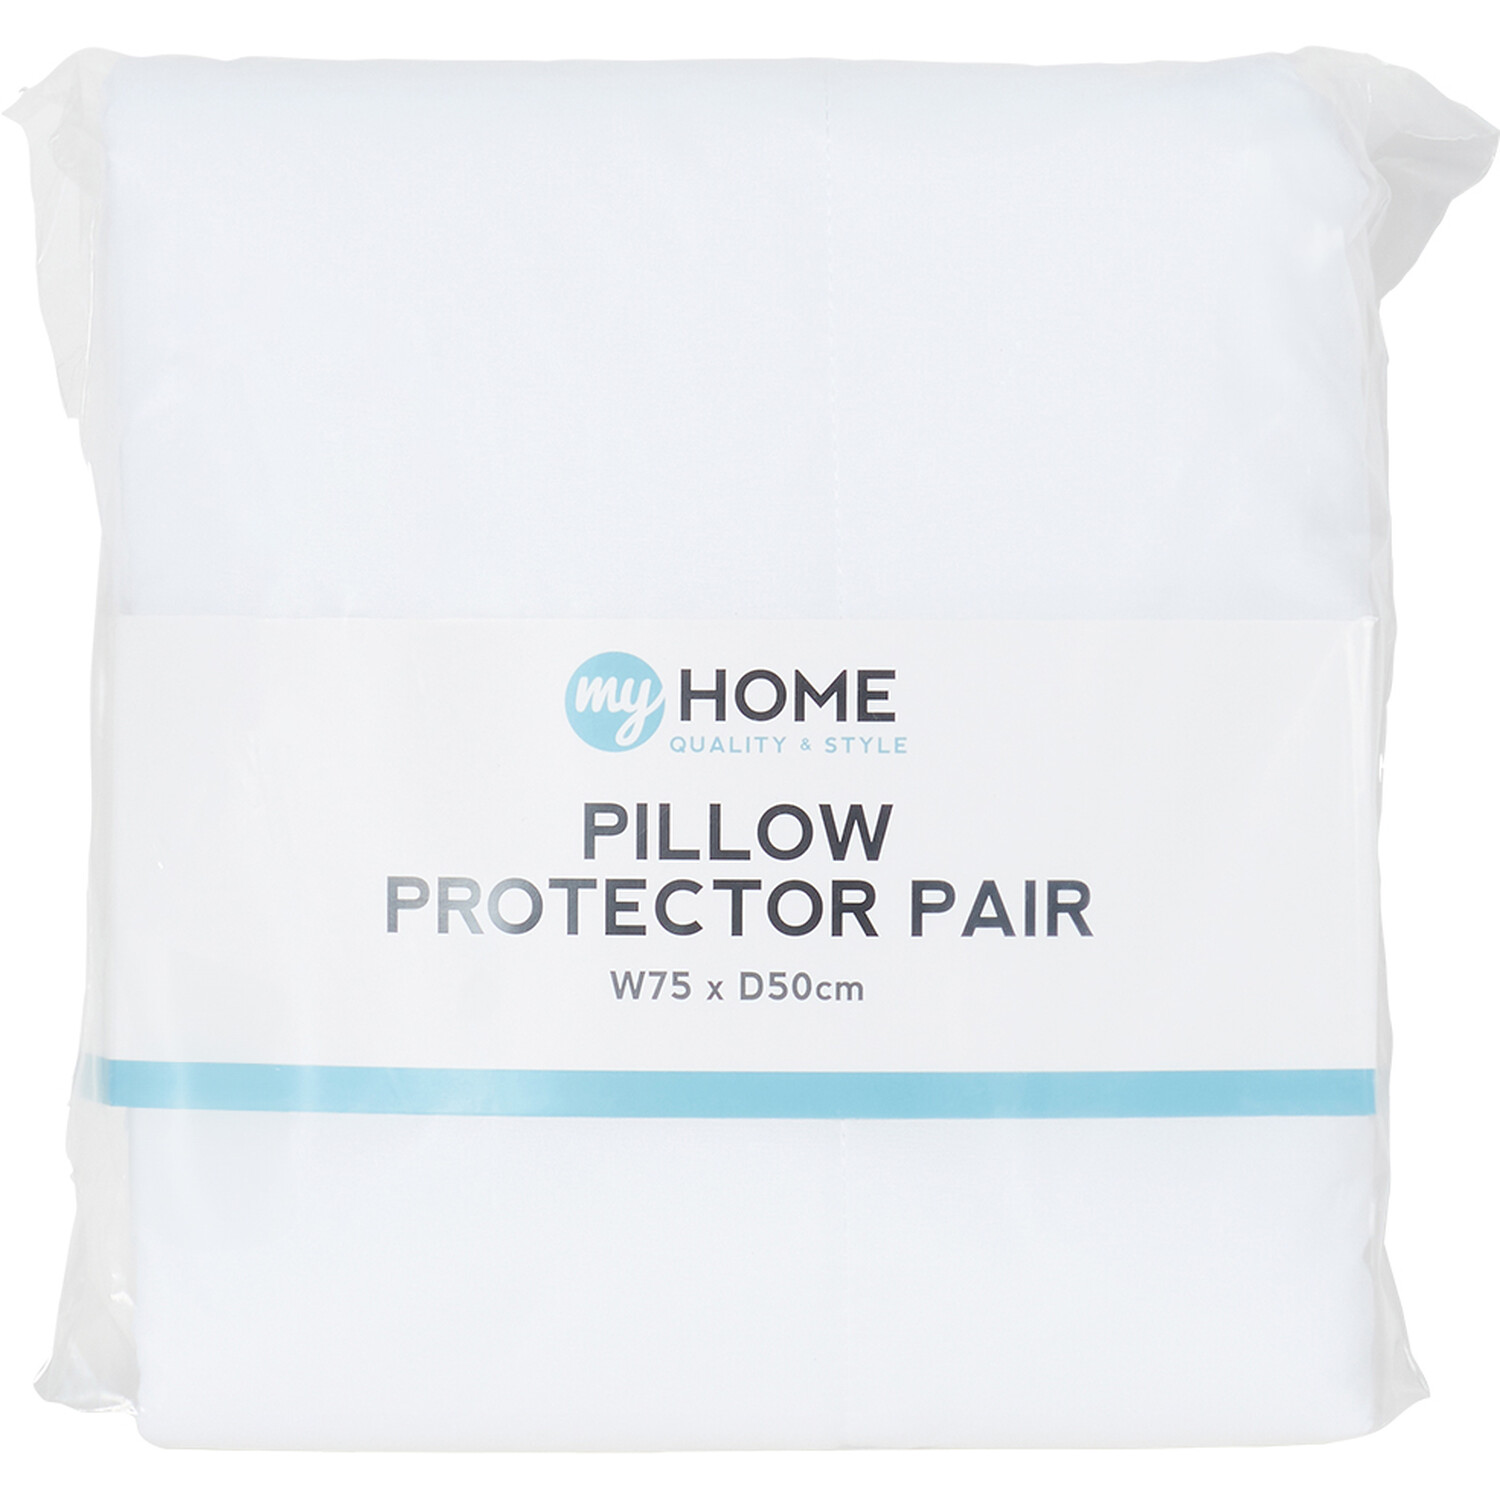 My Home Pillow Protector Pair Image 1